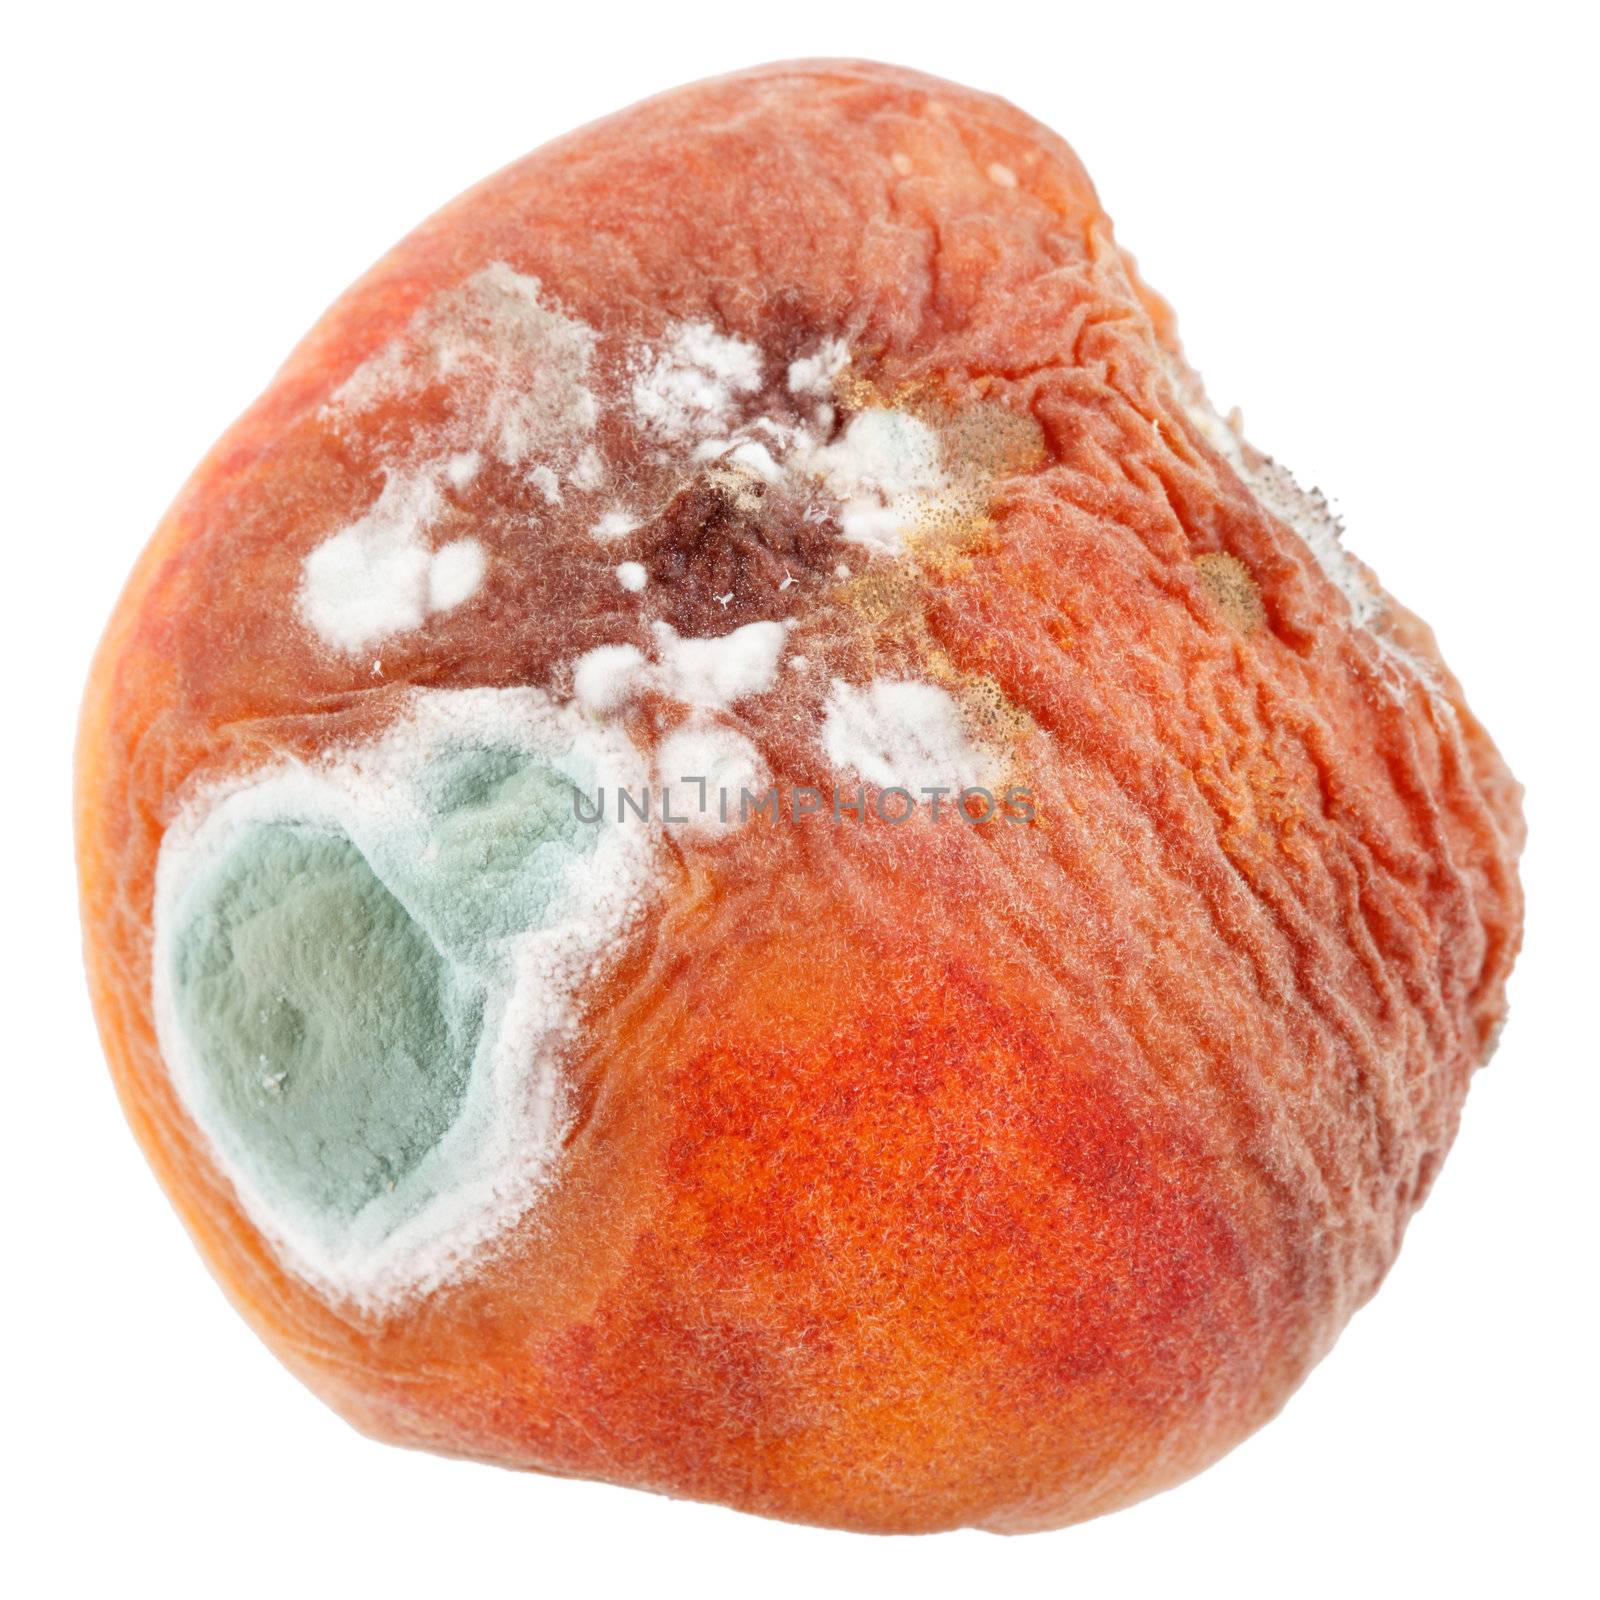 mould on peach 